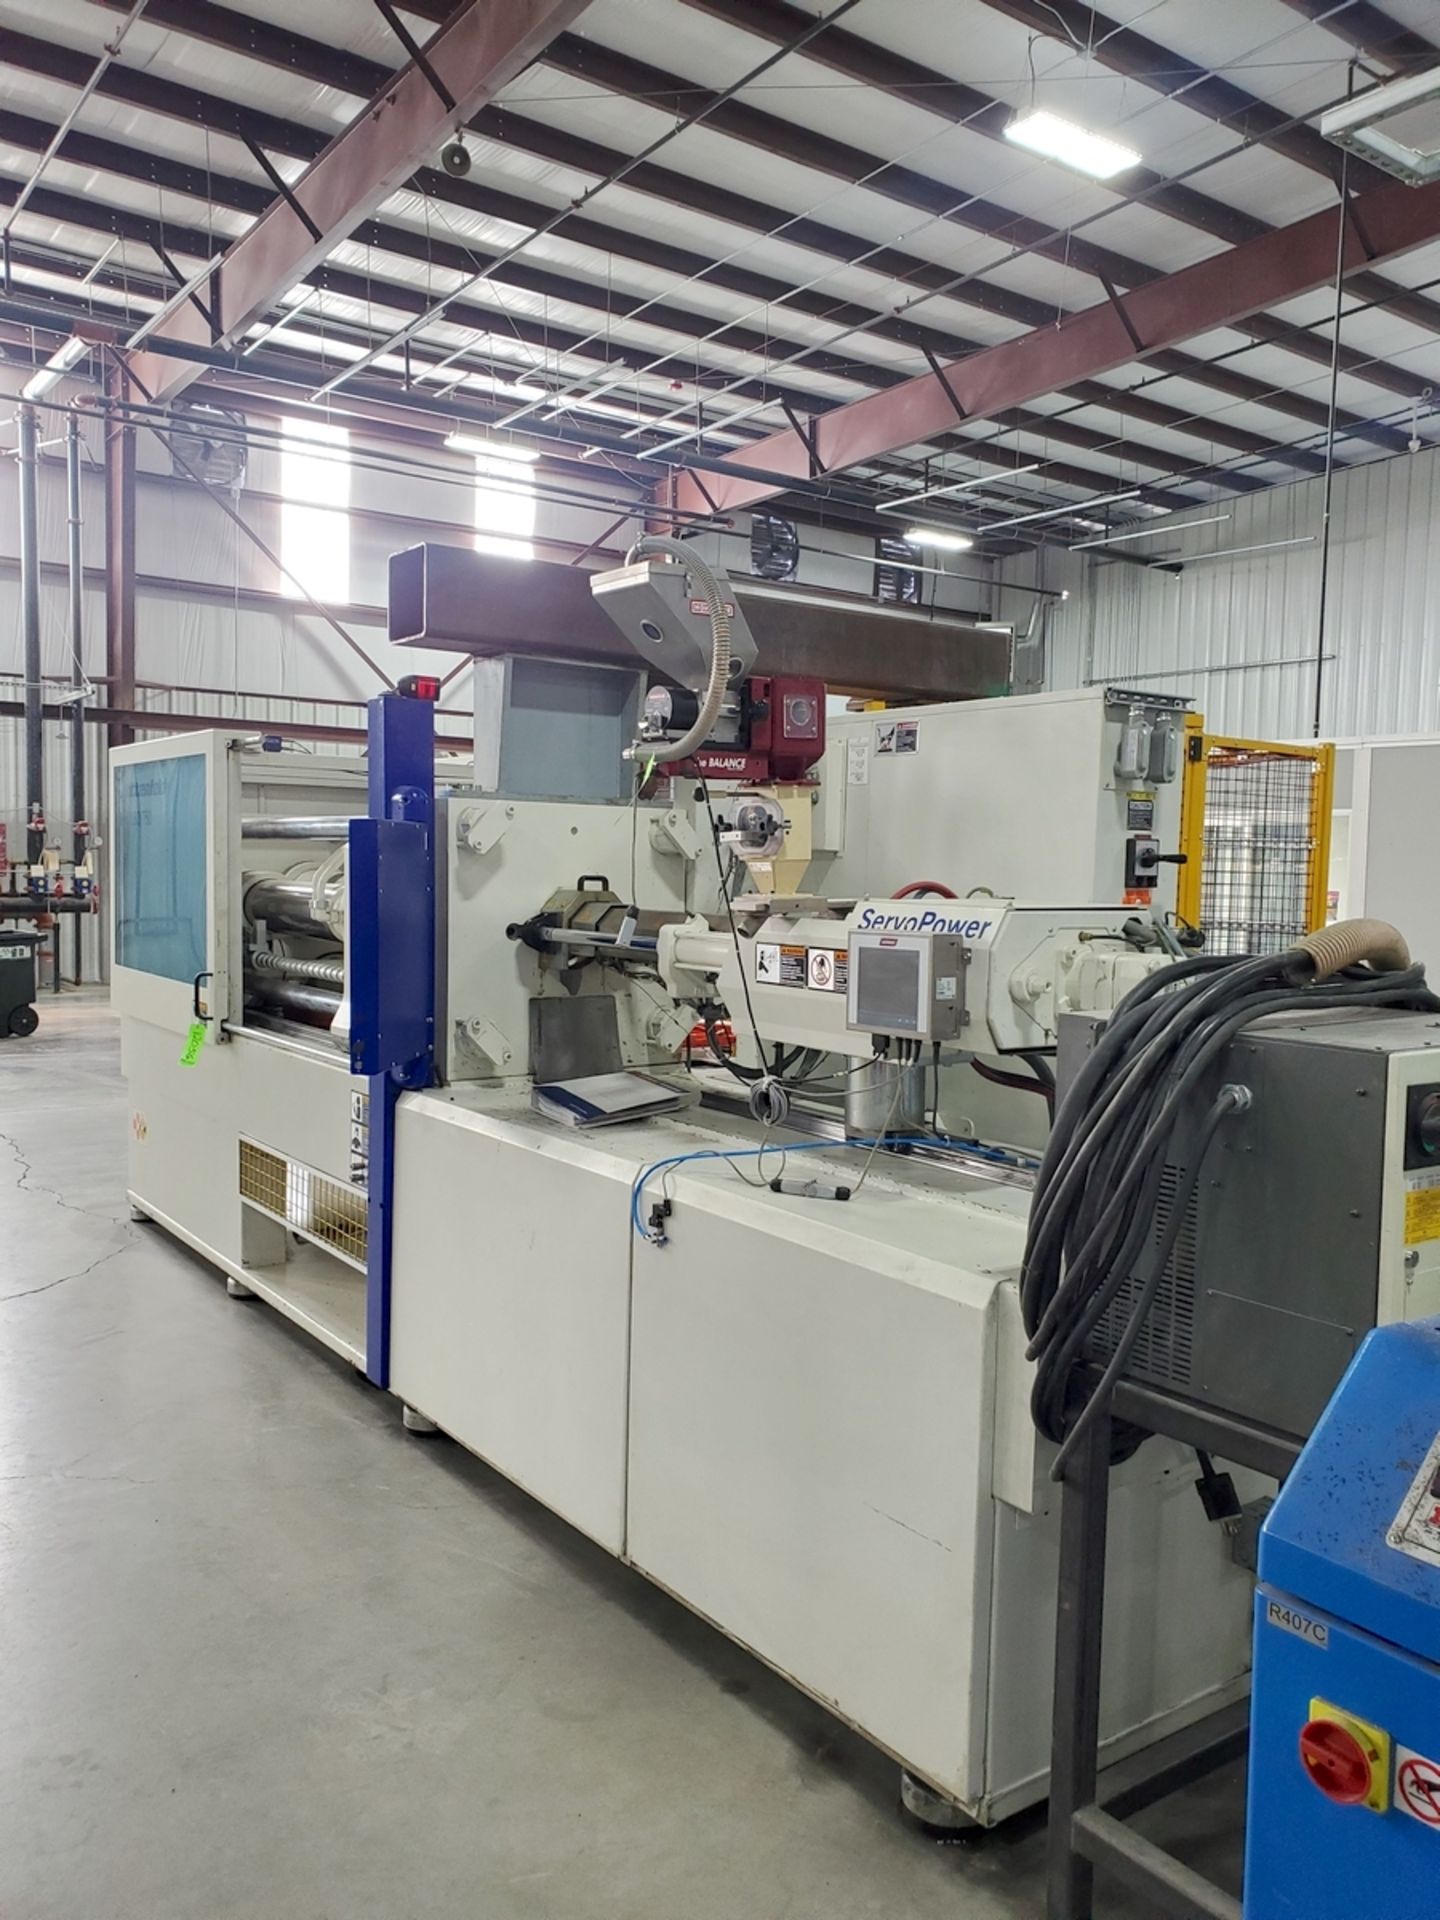 Battenfeld HM 180/750, 180 Ton Injection Molding Machine, New in 2013 - Image 5 of 12